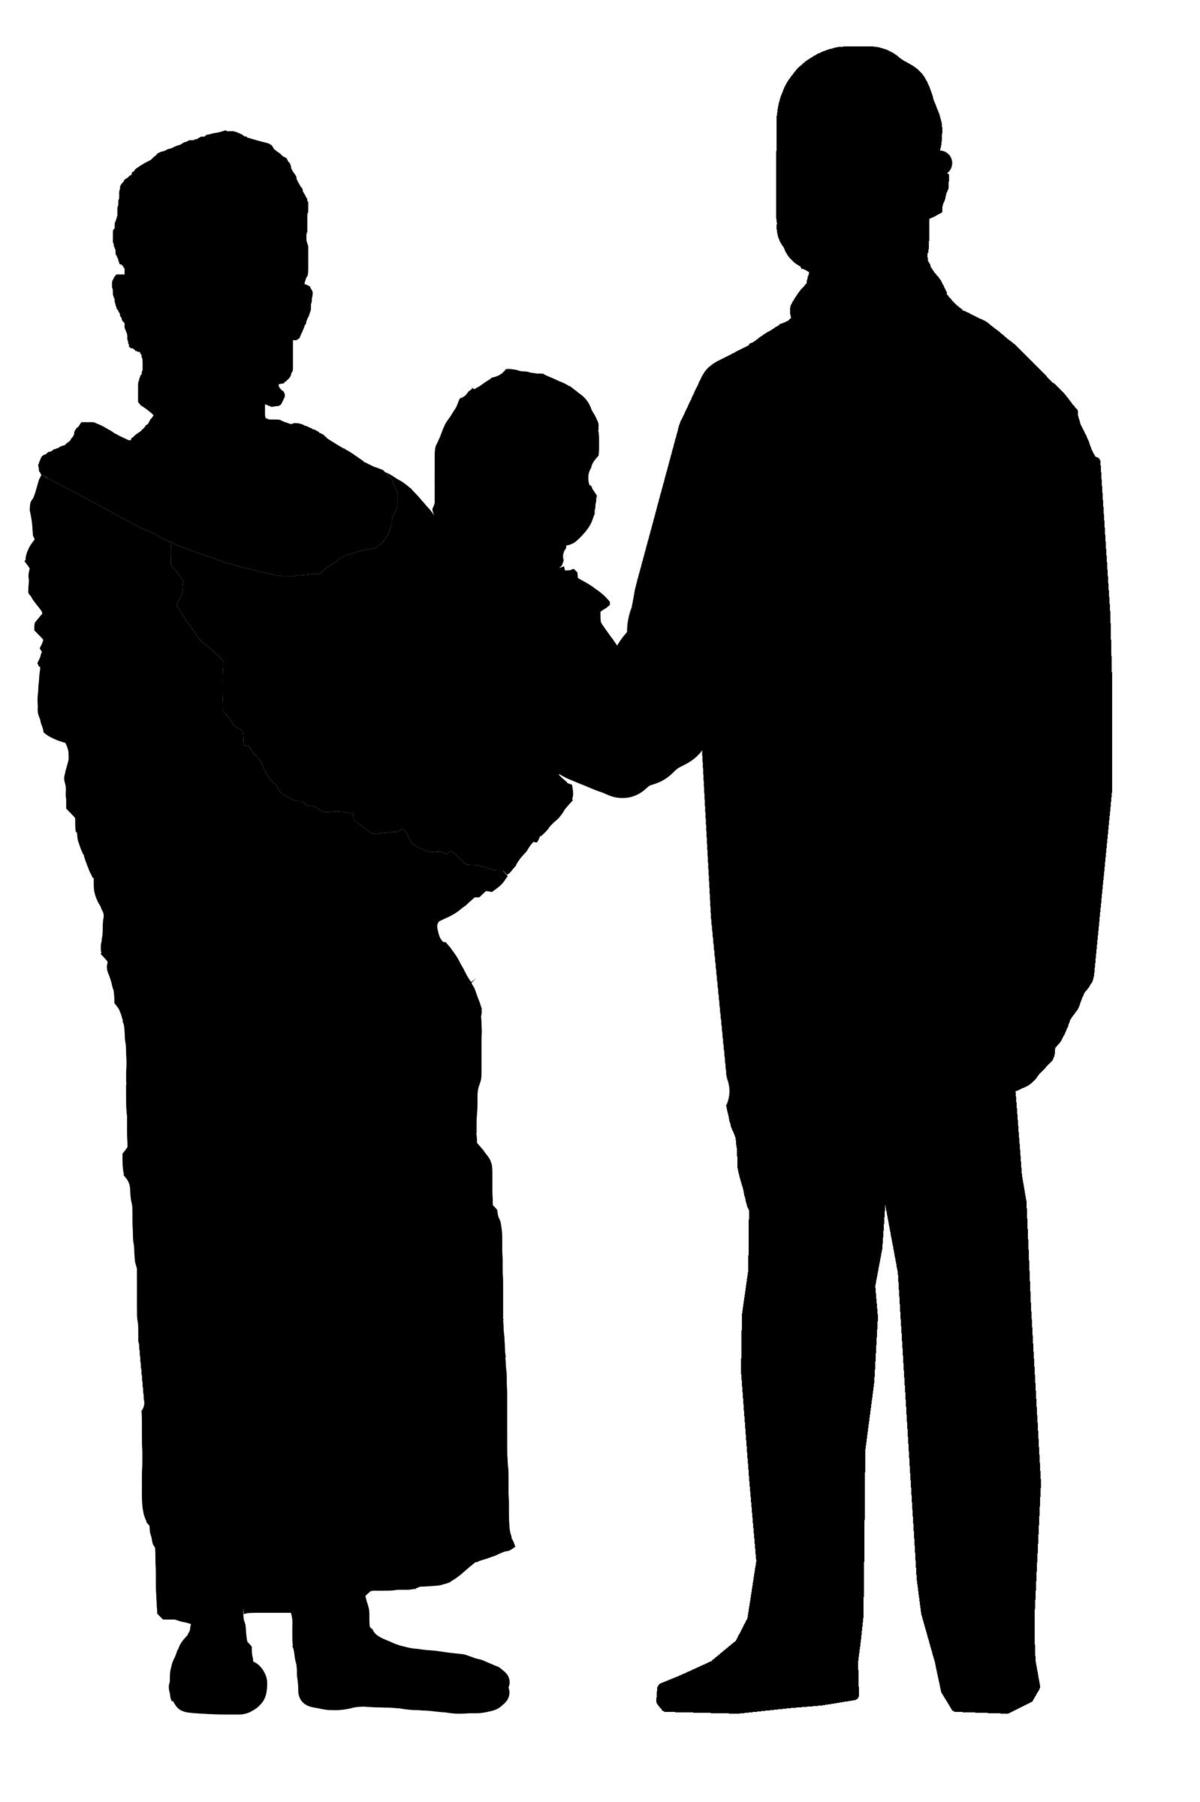 A silhouette of a man and a woman. The woman is holding their baby in her arms.